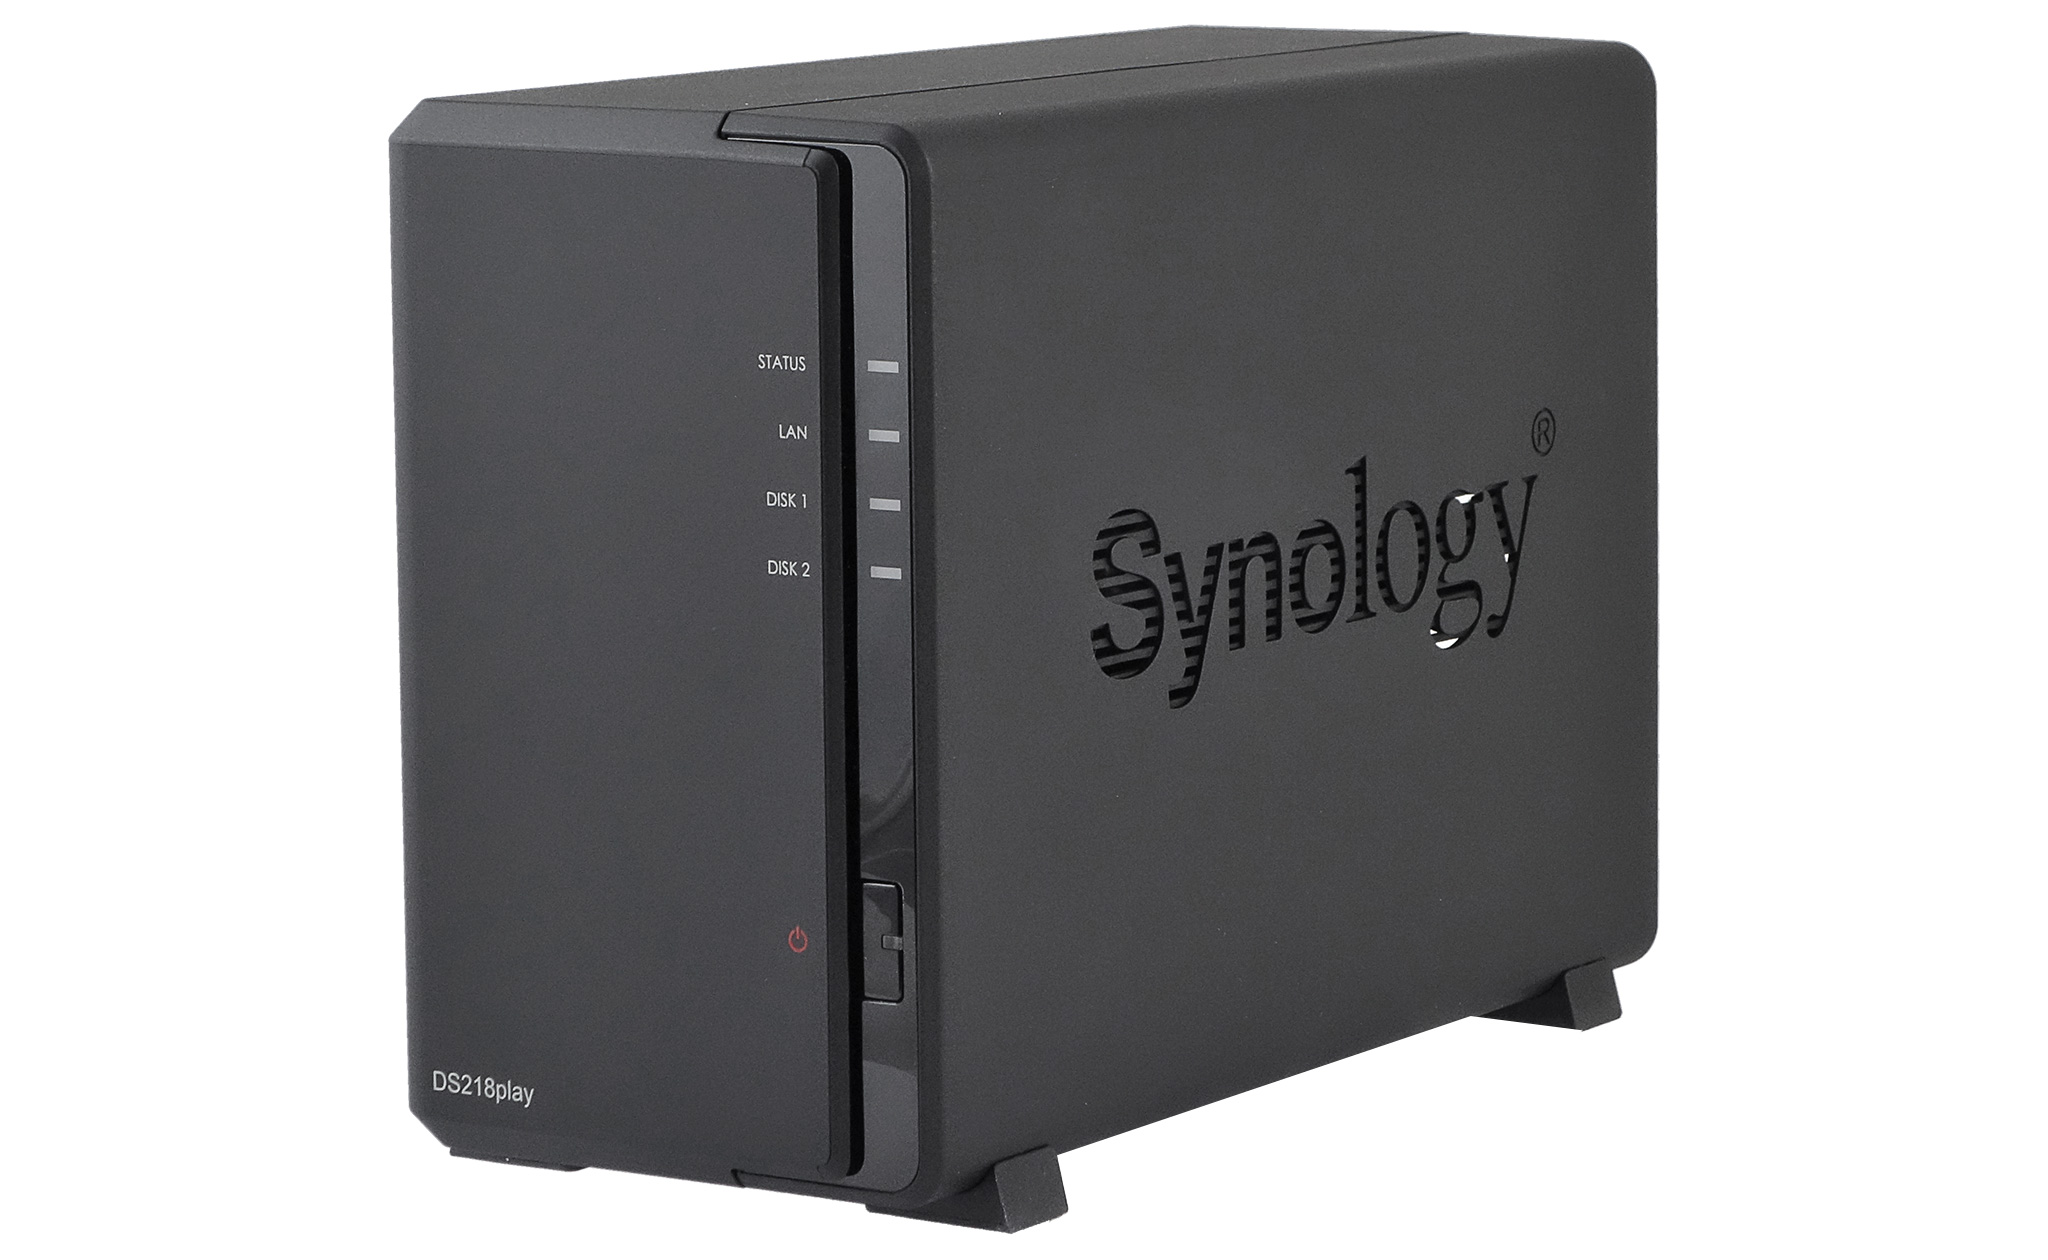 Manifestation Required Portrait Synology DiskStation DS218play 2-bay NAS review | KitGuru